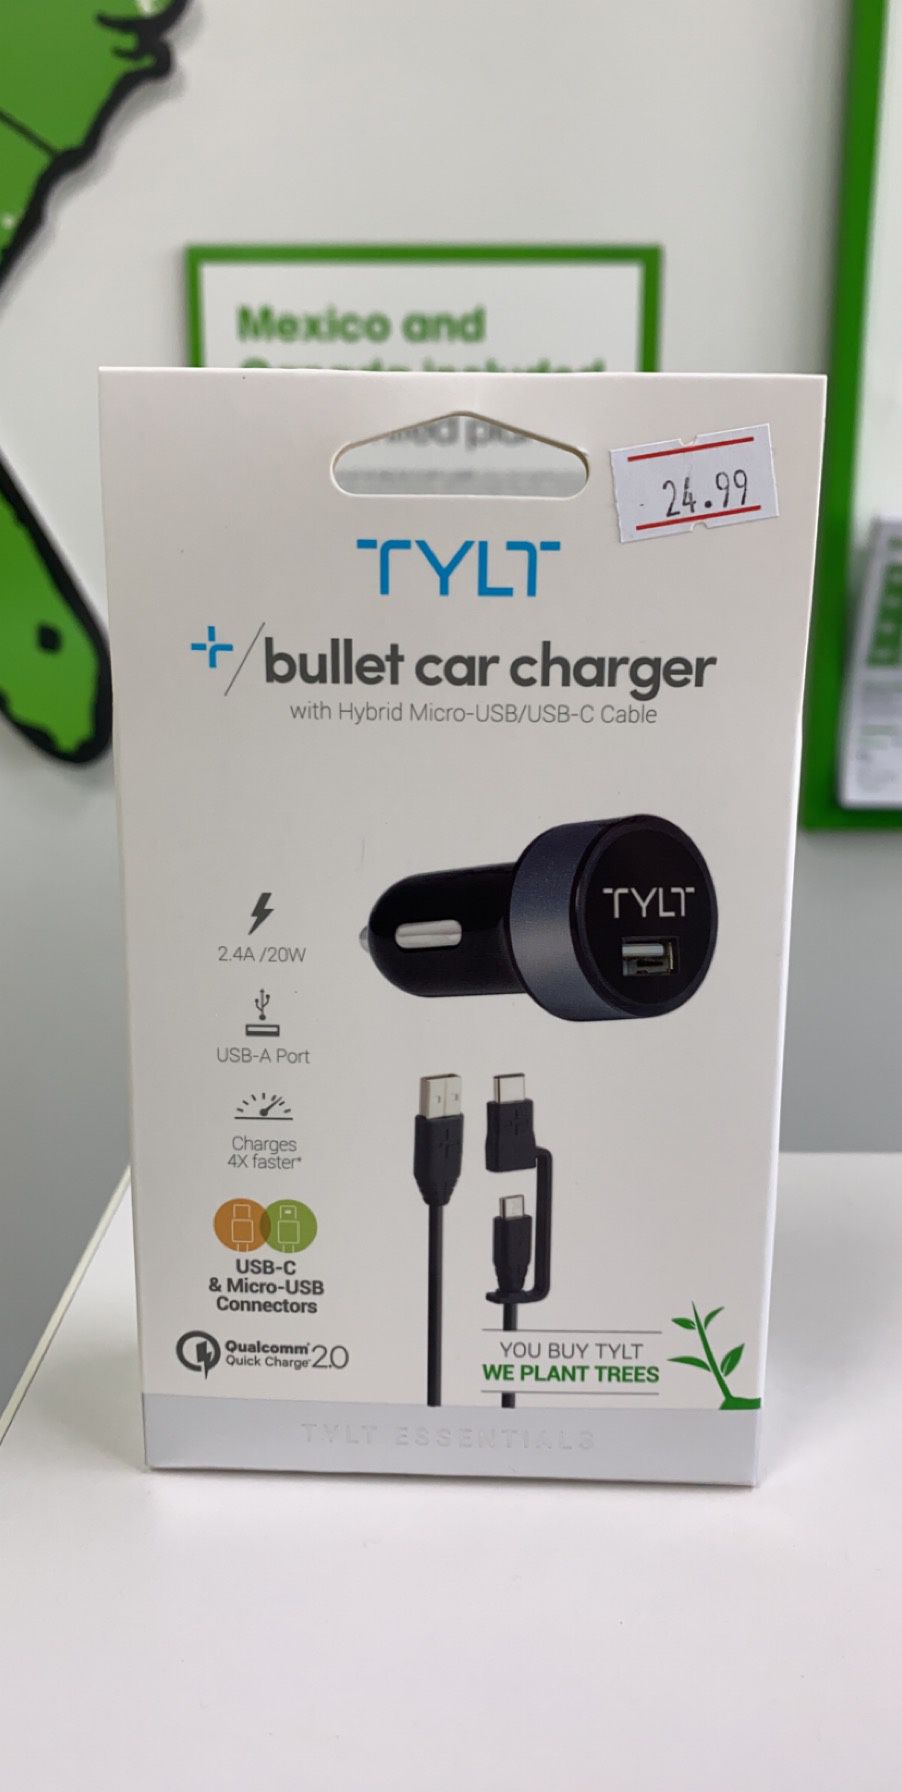 Tylt Bullet Car Charger